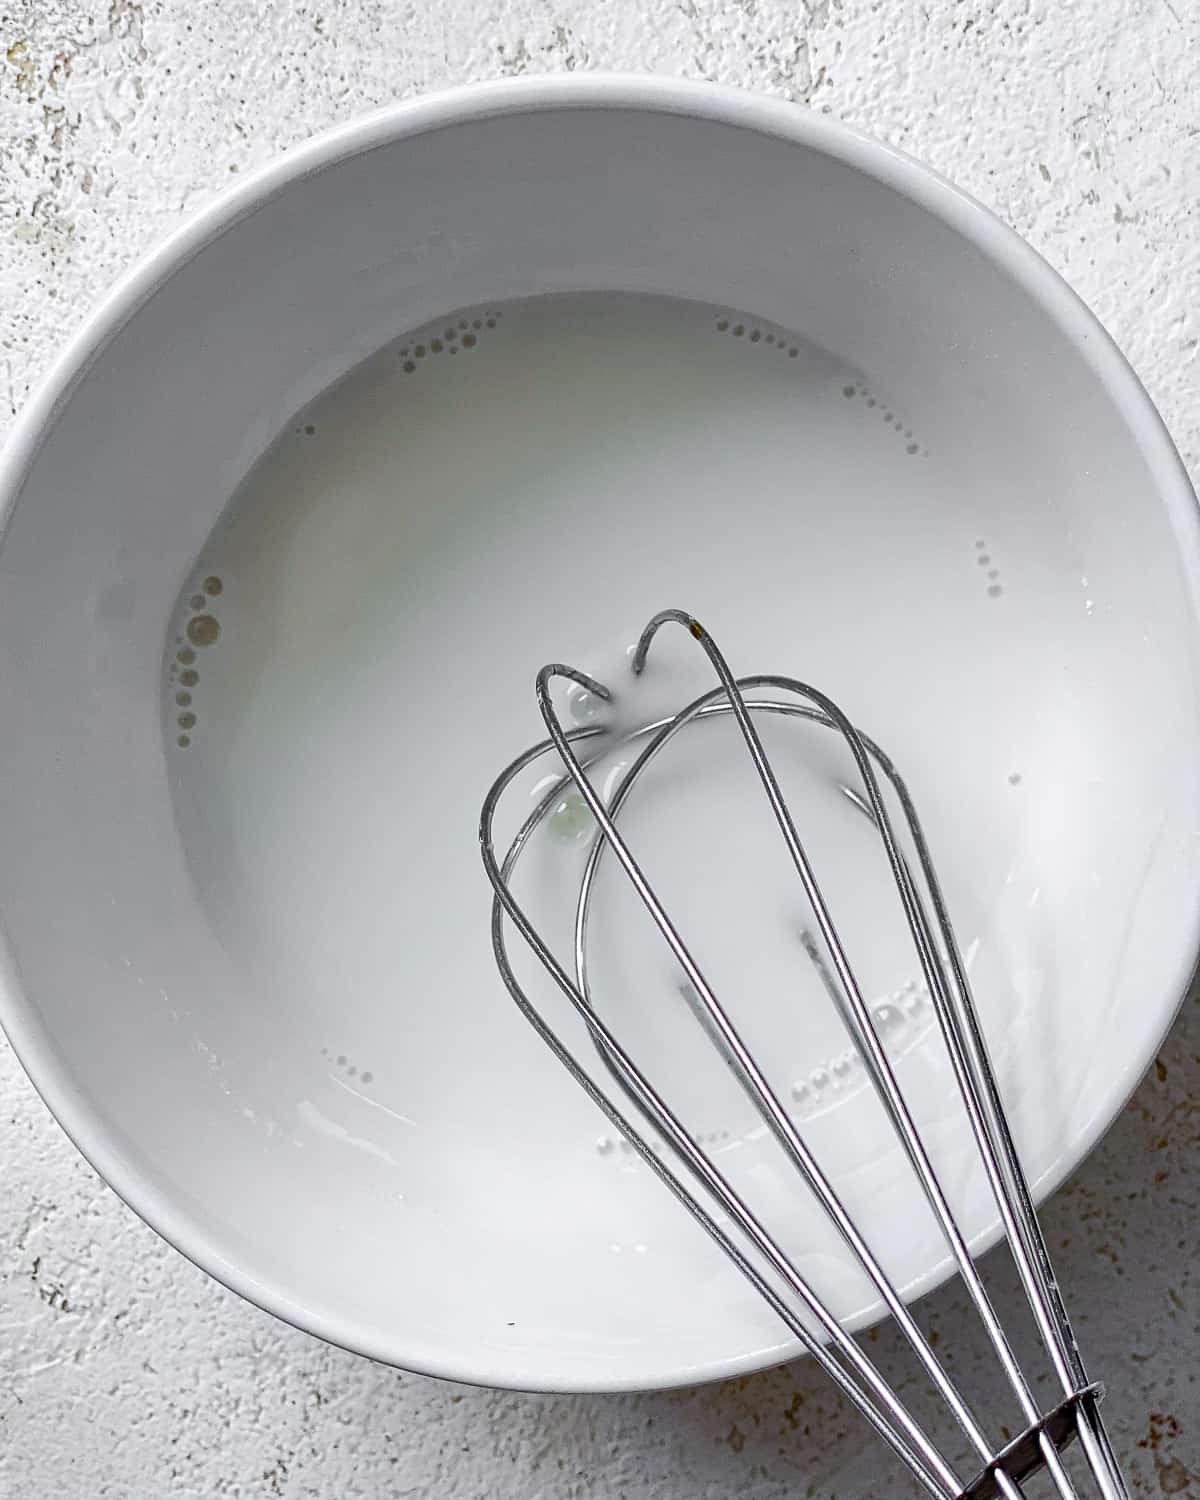 process s،t of whisking ingredients in a white bowl